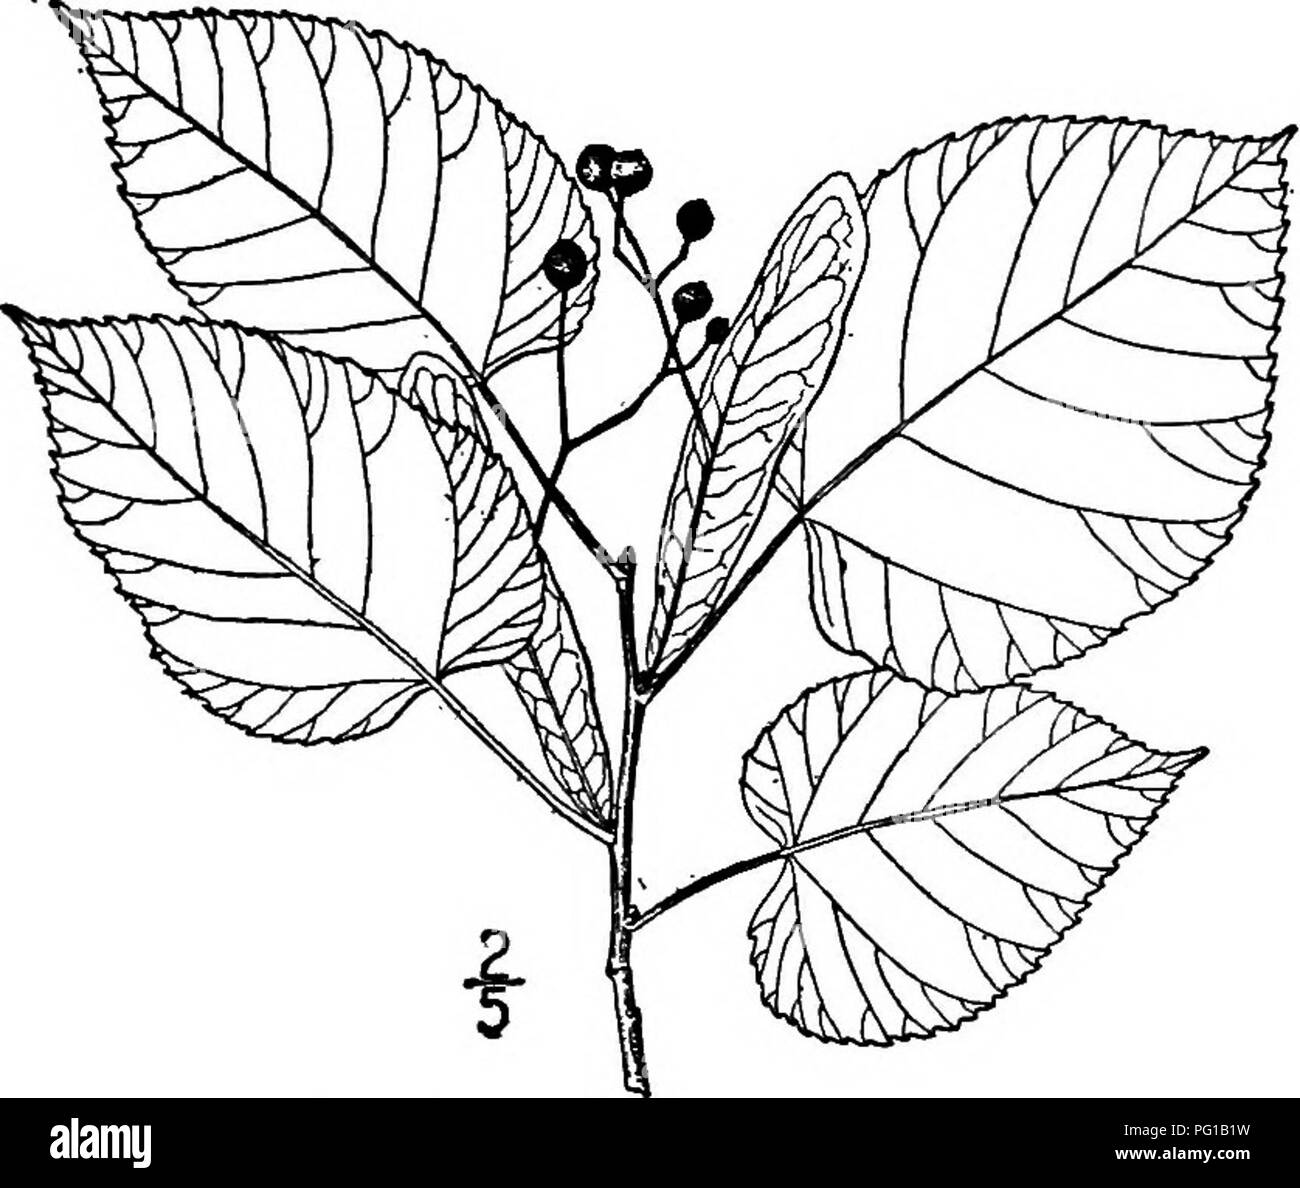 . North American trees : being descriptions and illustrations of the trees growing independently of cultivation in North America, north of Mexico and the West Indies . Trees. 690 The Basswoods 8. TEXAS bASSWOOD—Tflia leptophyUa (Ventenat) Small Tilia pubescms leptophyUa Ventenat This tree much resembles the Downy basswood, being considered merely a variety of it by some authors. It is smaller in all its parts and smoother. It occurs in low woods of southern Louisiana and southeastern Texas, extending north to Missouri.. Fig. 642. — Texas Basswood. Its leaves are thin and membranous, ovate to b Stock Photo